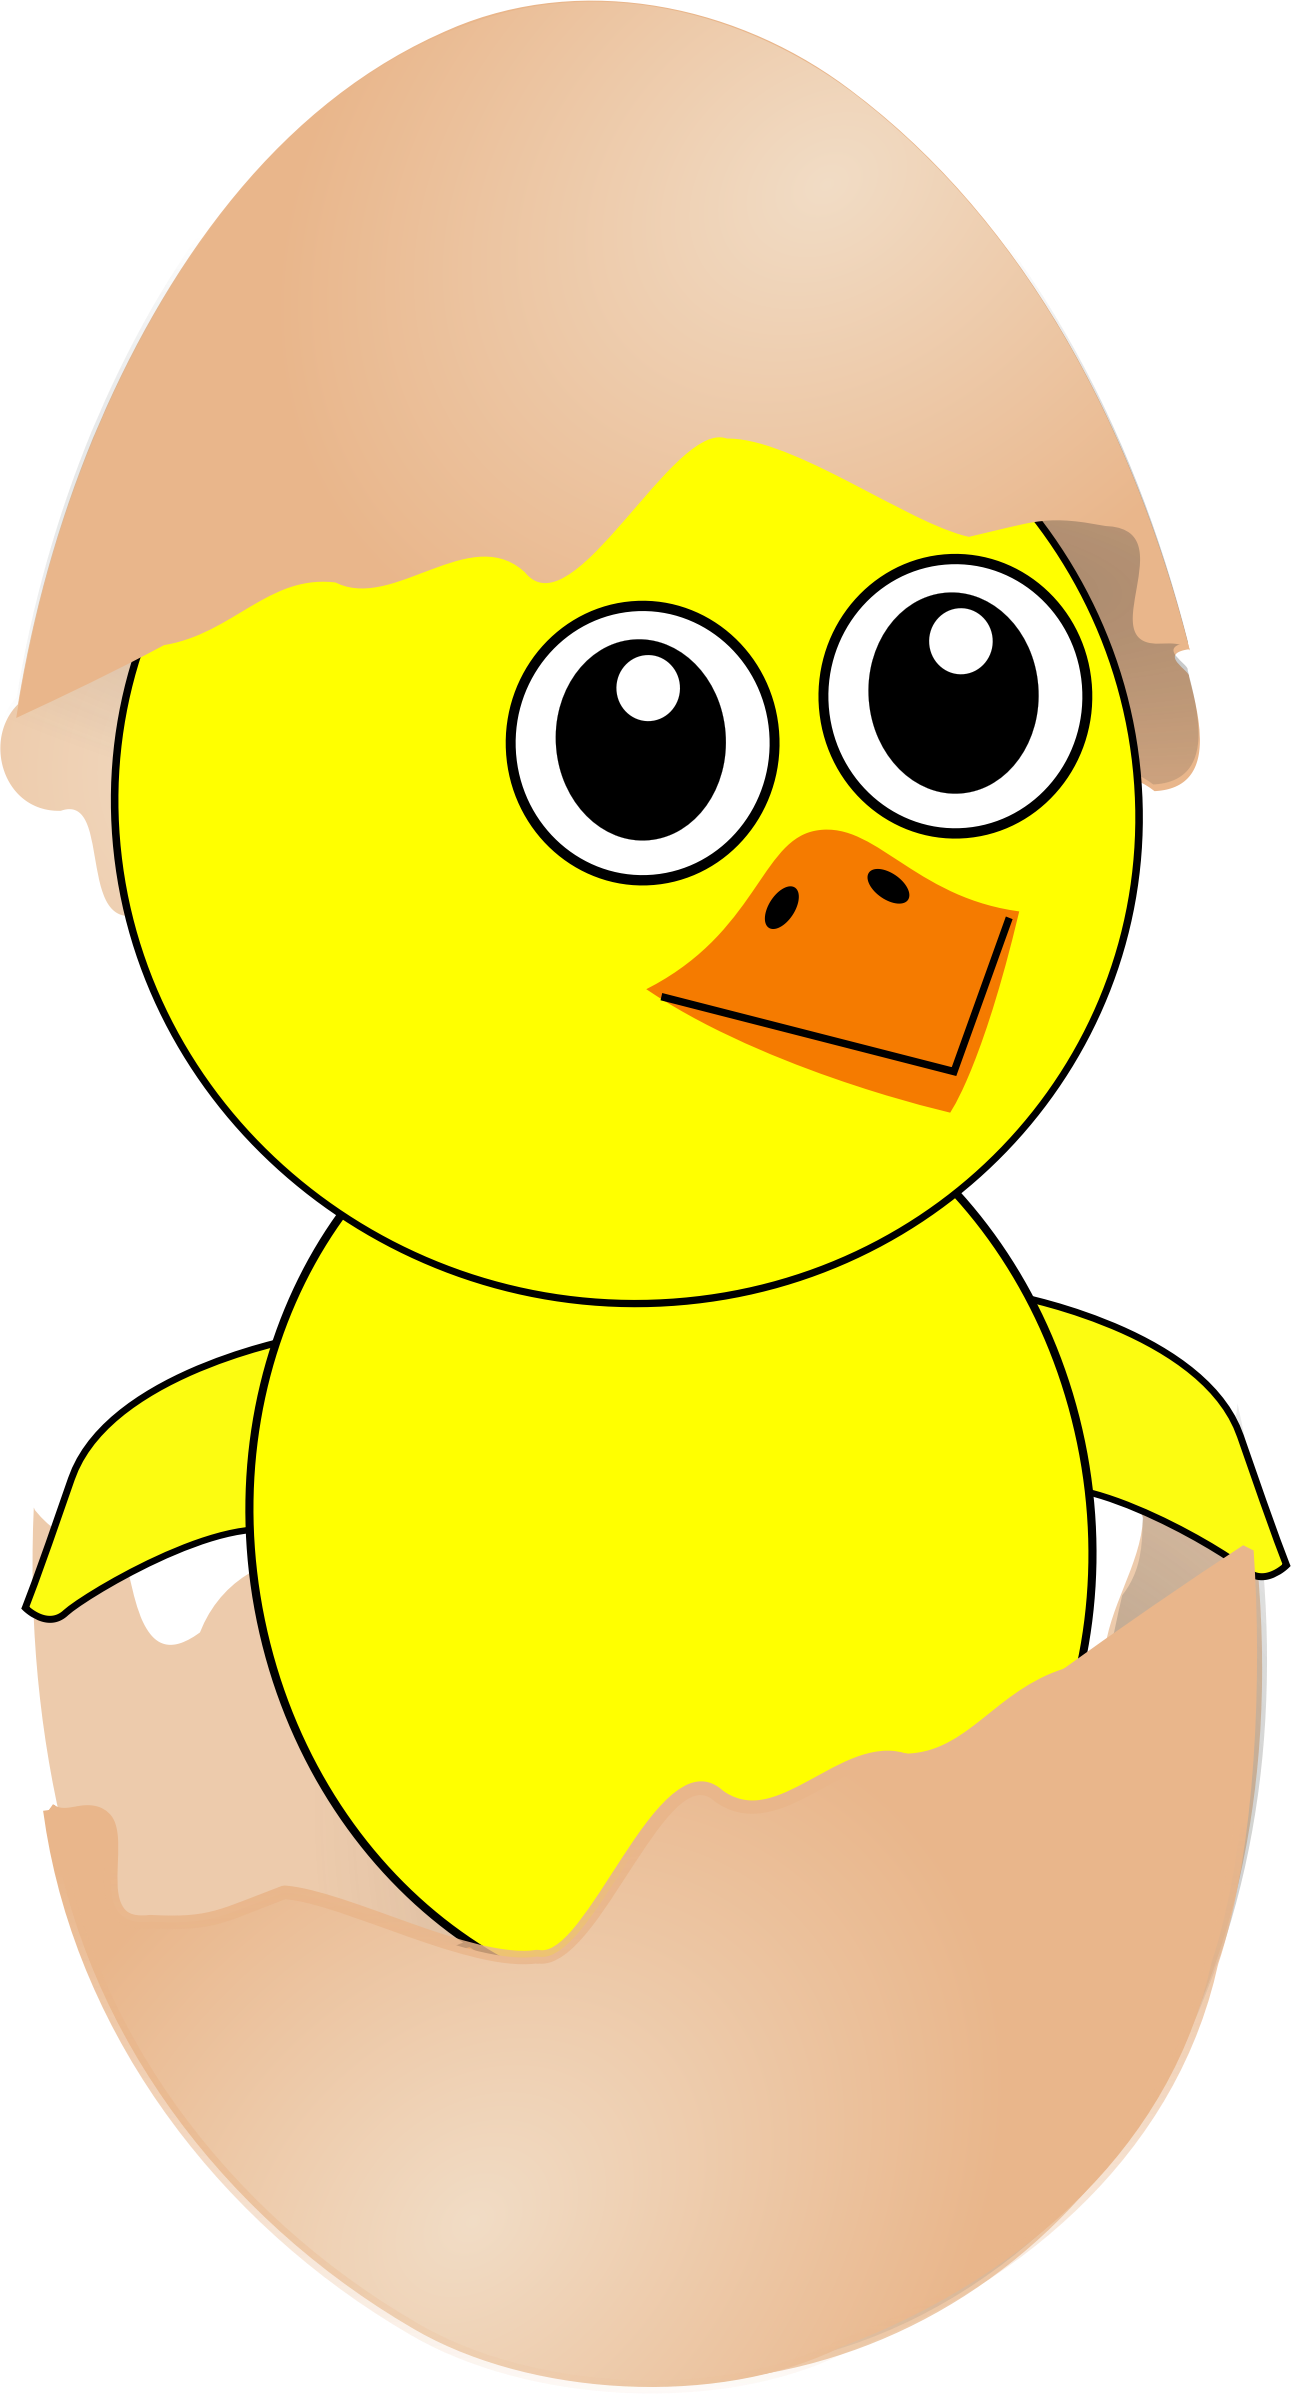 Clipart - Funny Chick Cartoon Newborn Coming Out from the Egg with ...